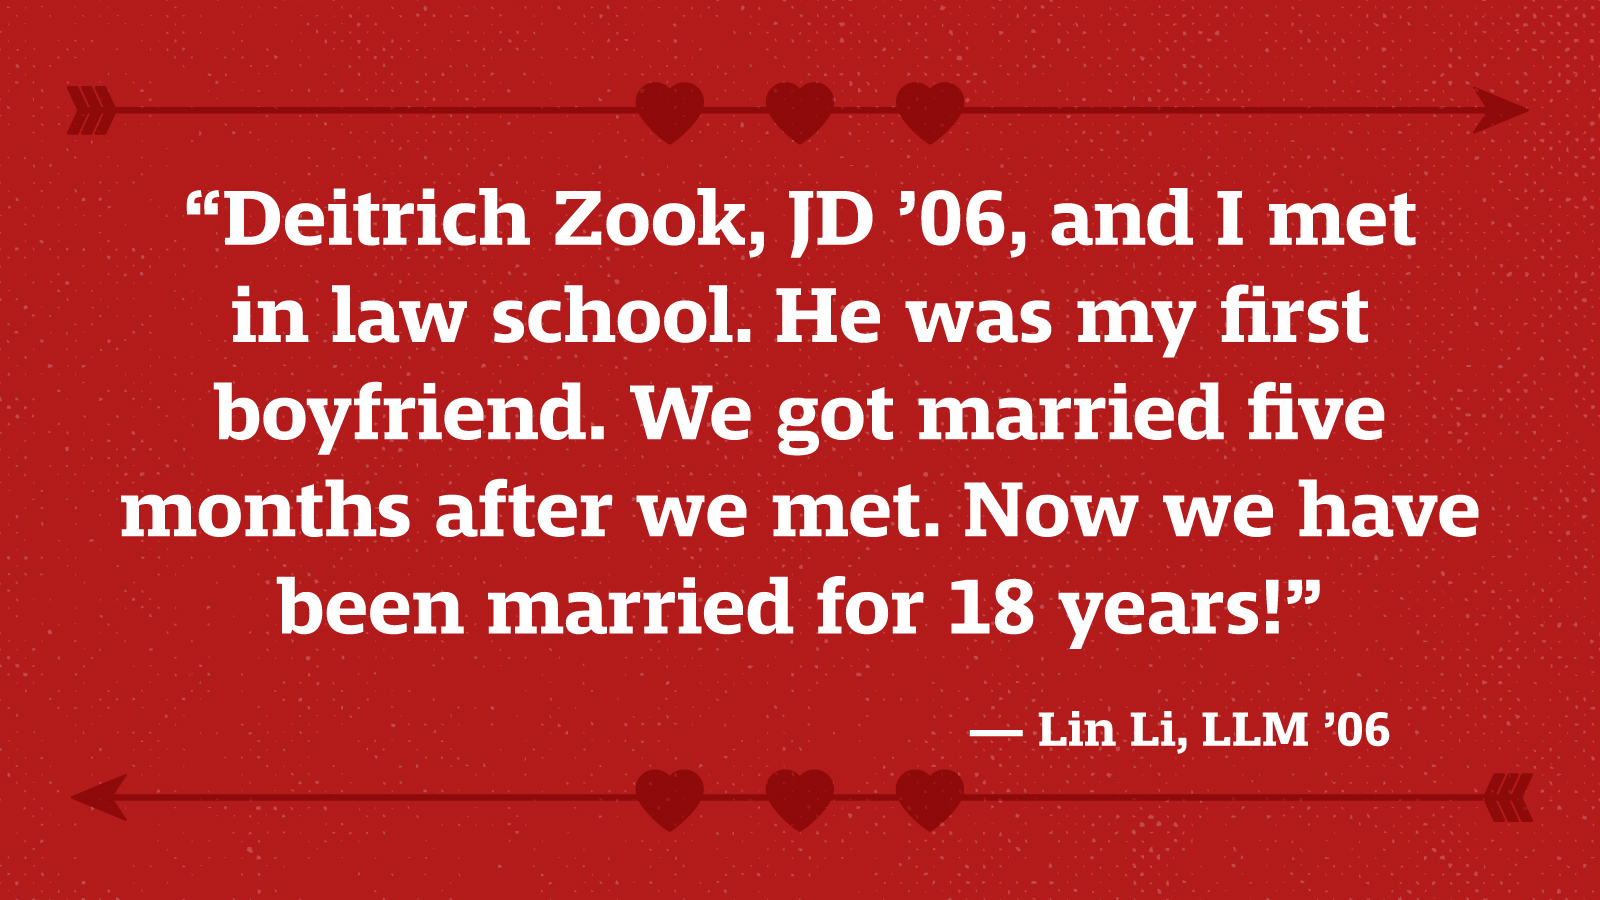 “Deitrich Zook, JD ’06, and l met in law school. He was my first boyfriend. We got married five months after we met. Now we have been married for 18 years!” — Lin Li, LLM ’06